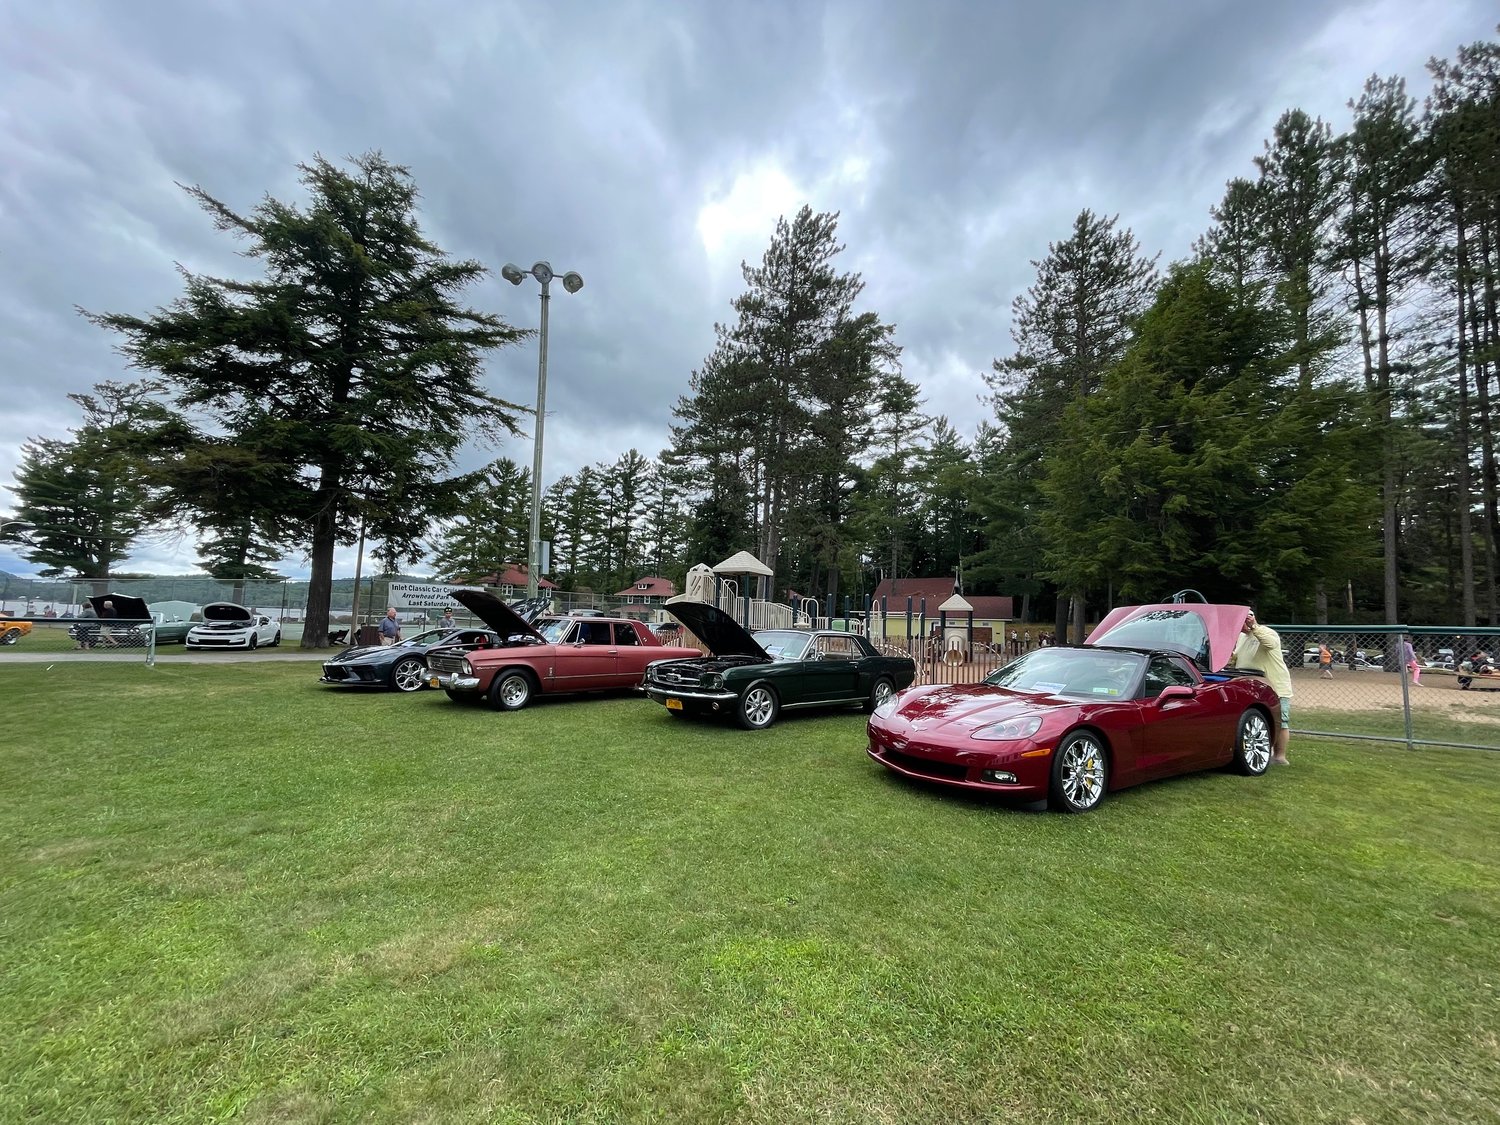 More than 100 classic vehicles took over the parking lot of Arrowhead Park for the 9th annual Inlet Classic Car Cruise and Show sponsored by the Inlet Historical Society on July 30.